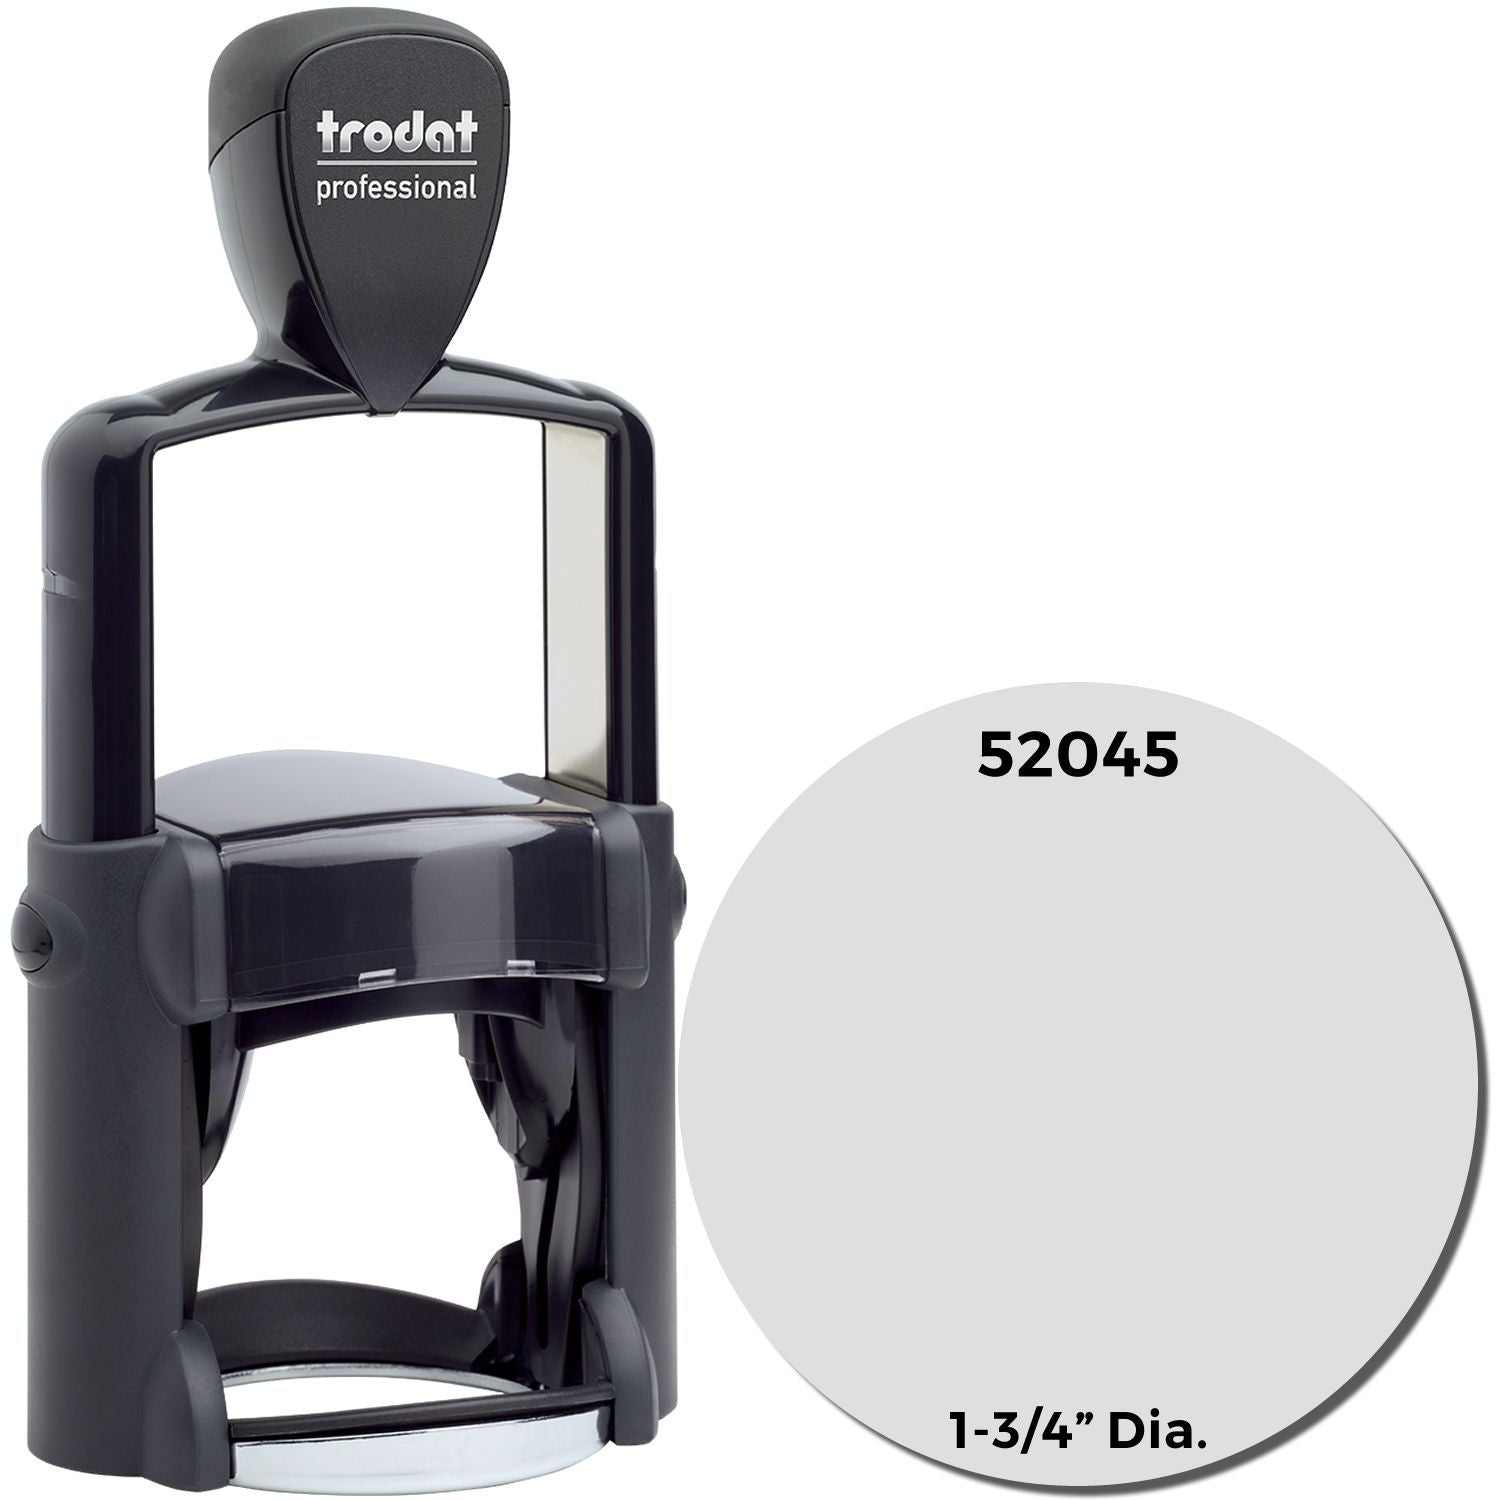 A Custom Self-Inking Stamp Trodat 52045 (Size: 1-3/4" Diameter) with a stamped image showing how the round image will look after stamping from this custom stamp.